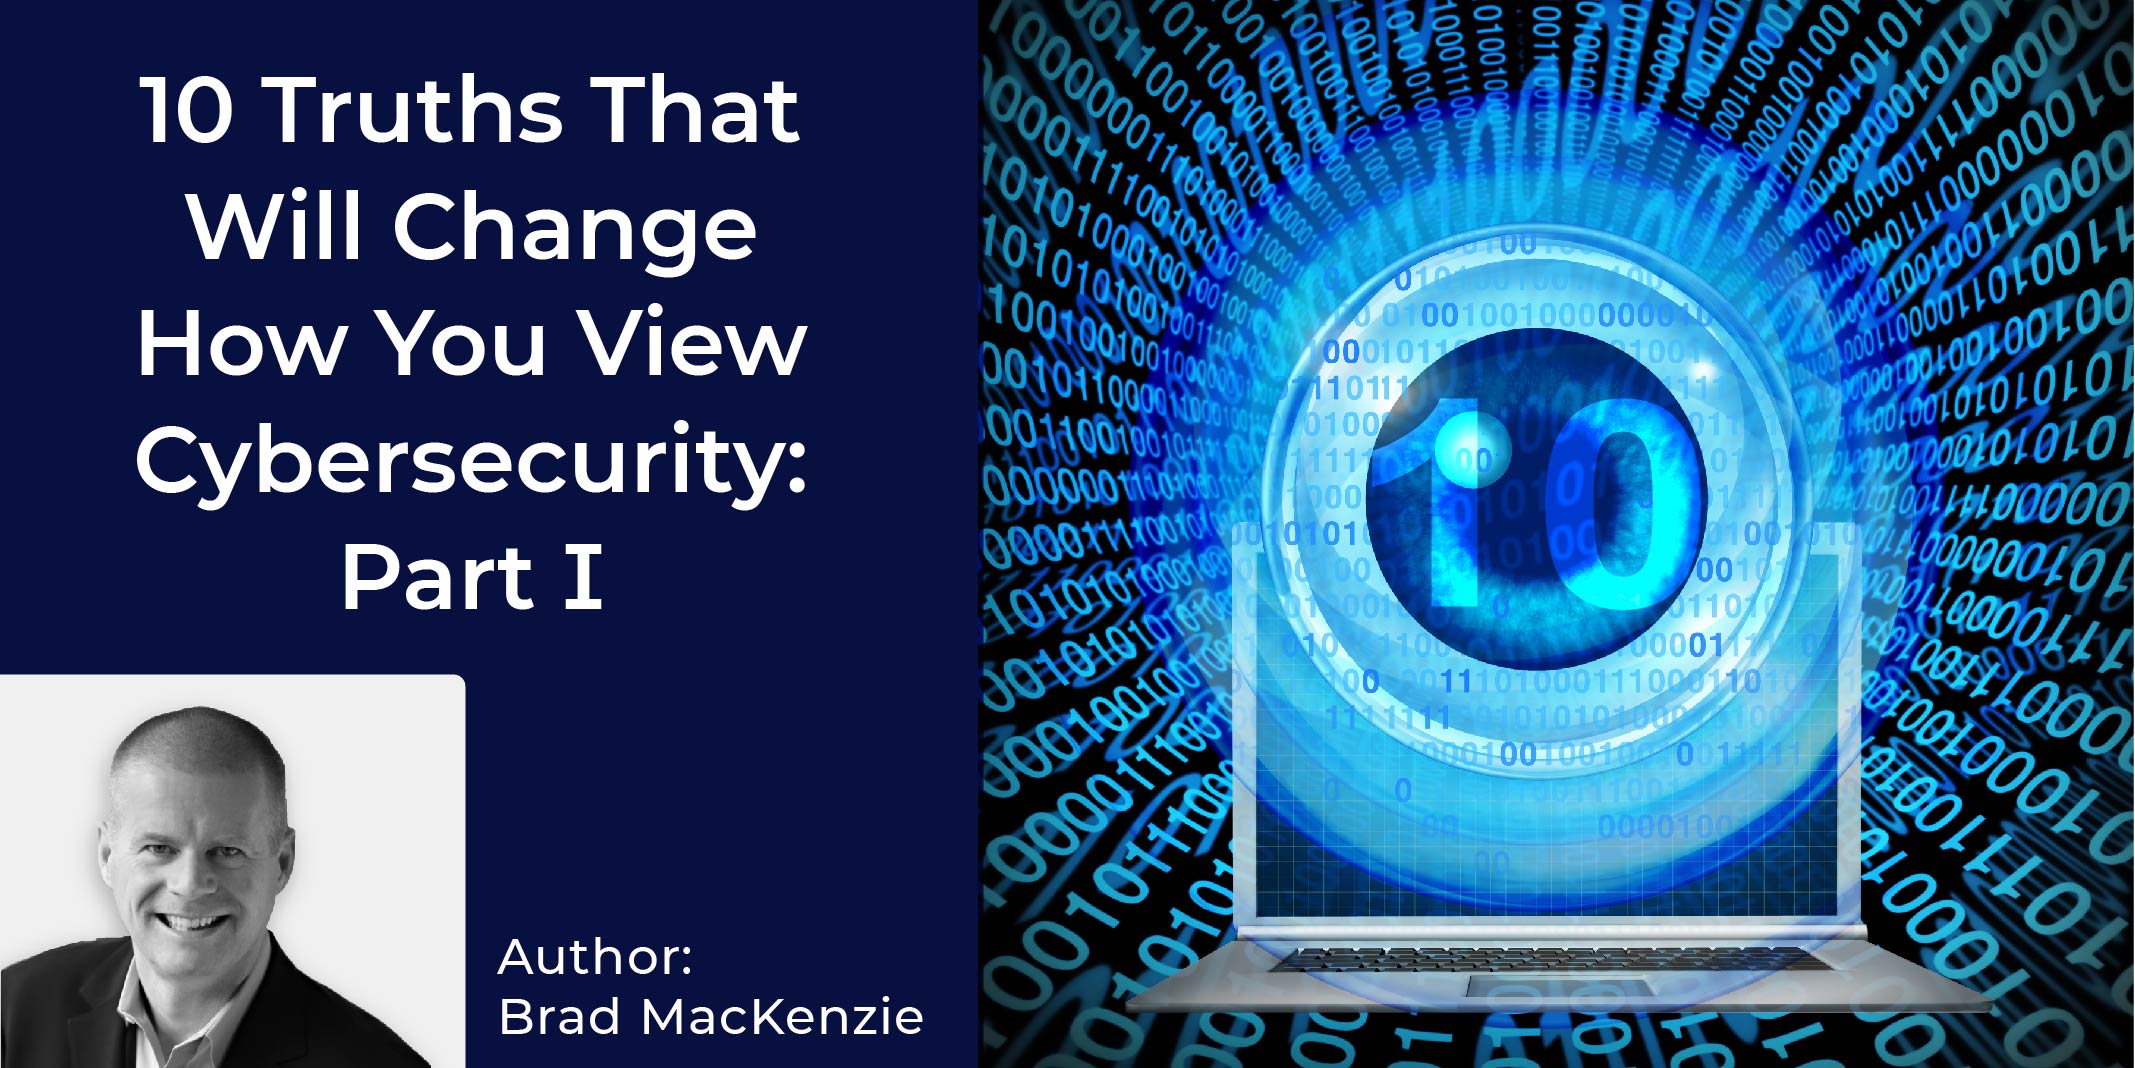 10 Truths That Will Change How You View Cybersecurity: Part I